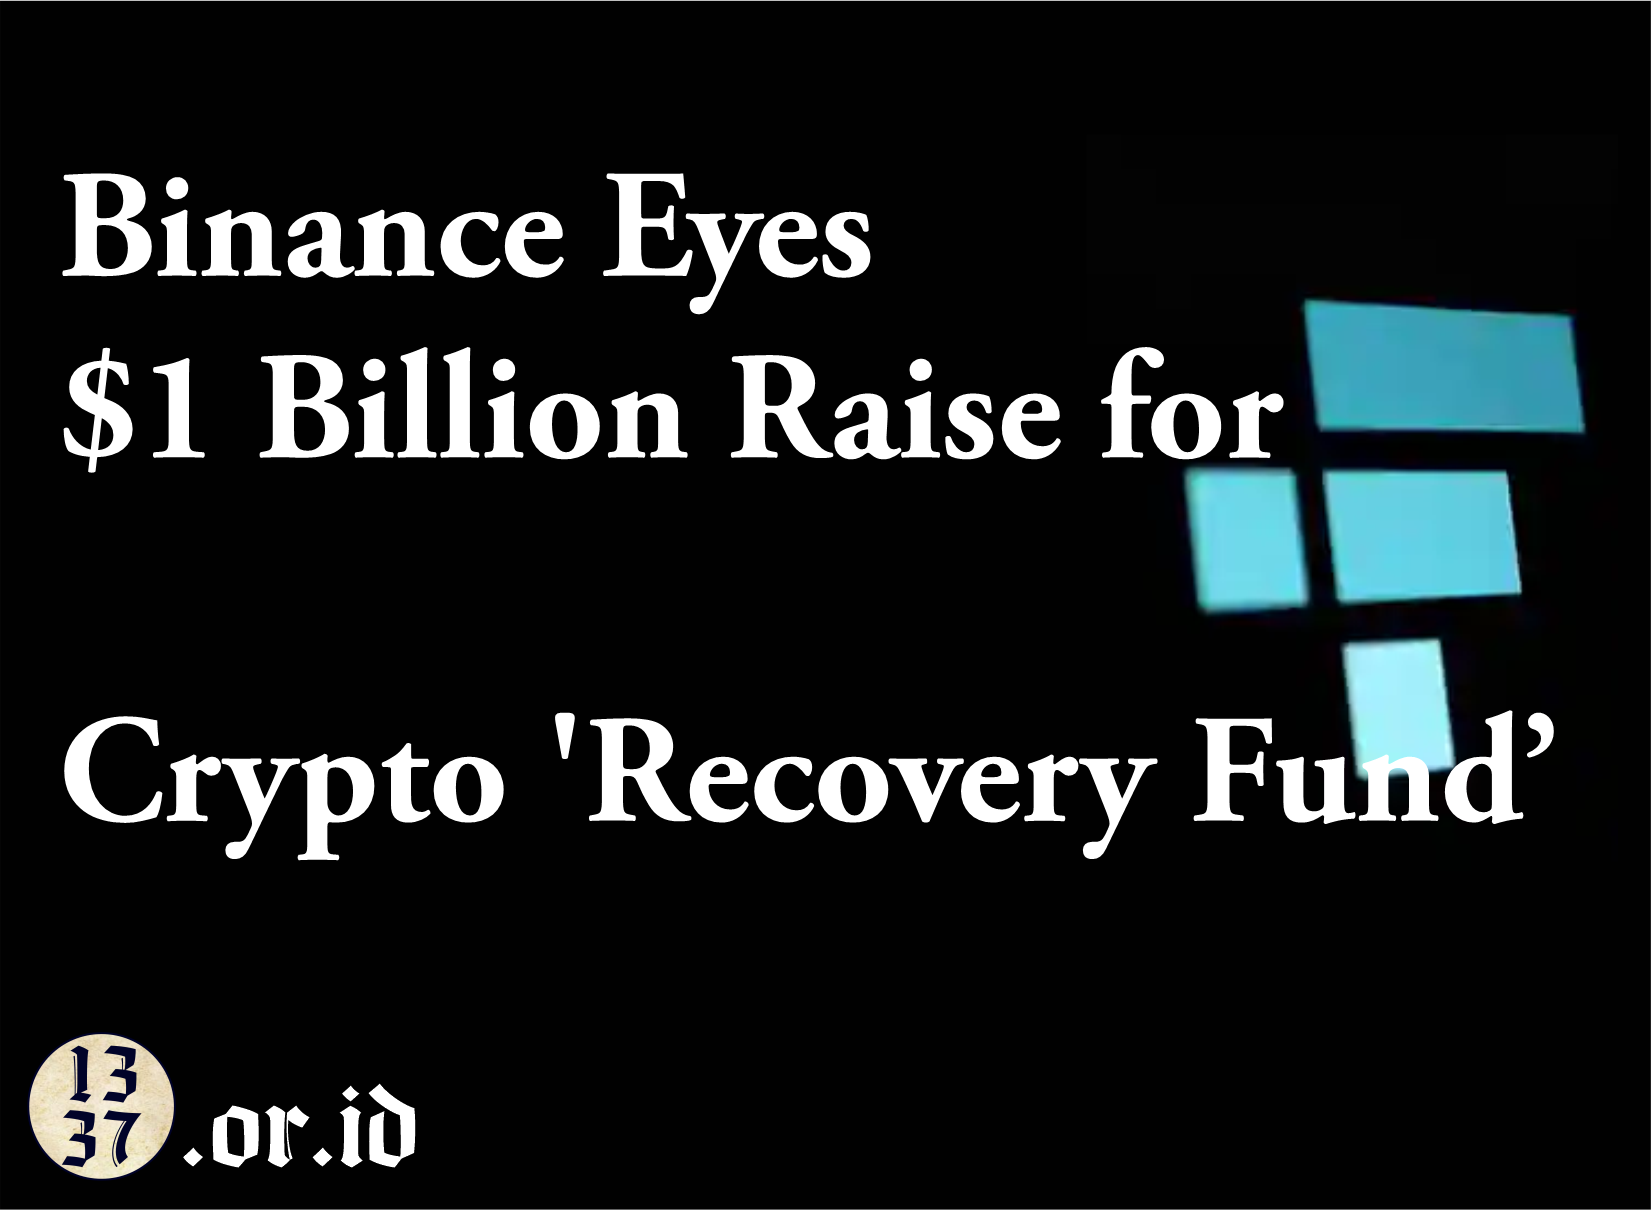 Binance Eyes $1 Billion Raise for Crypto 'Recovery Fund', Could Buy FTX Assets